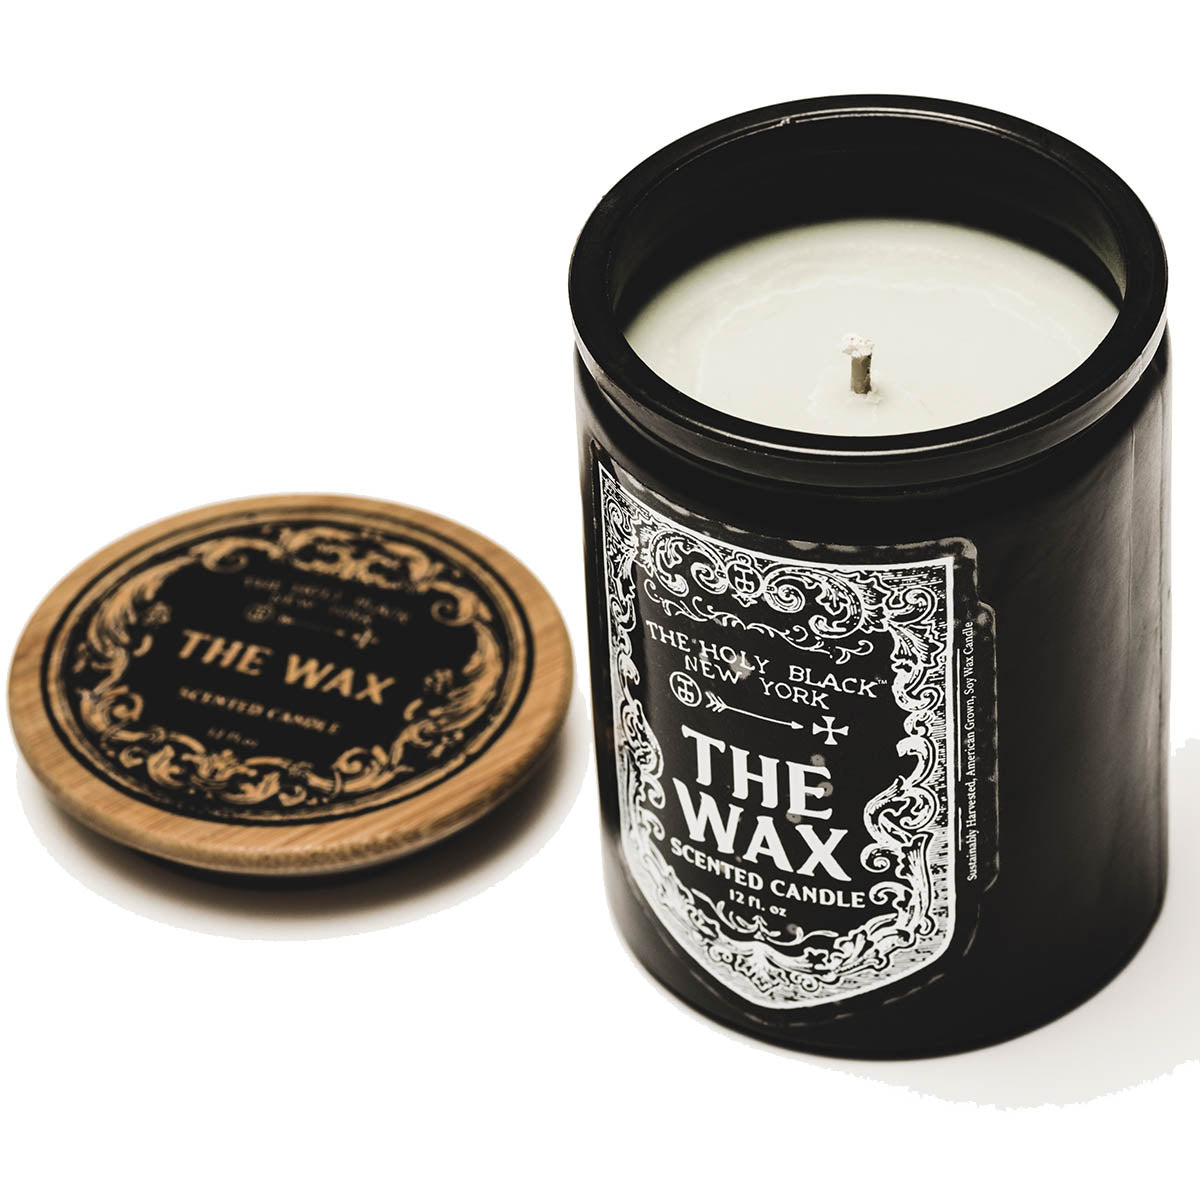 THE WAX Scented Candle